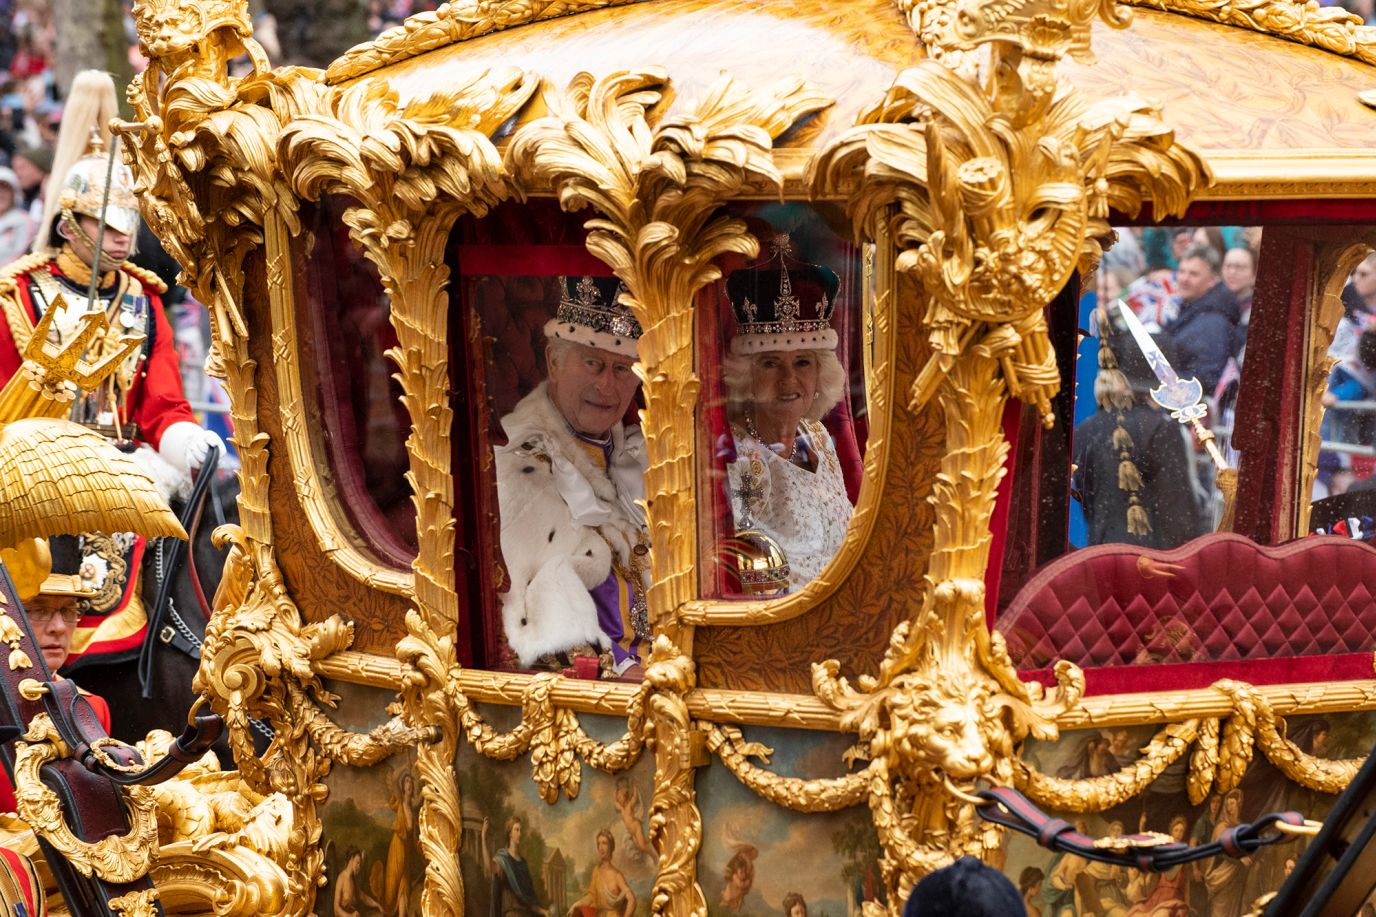 The King and Queen travel to Buckingham Palace in the Gold State Coach after the coronation ceremony at Westminster Abbey.